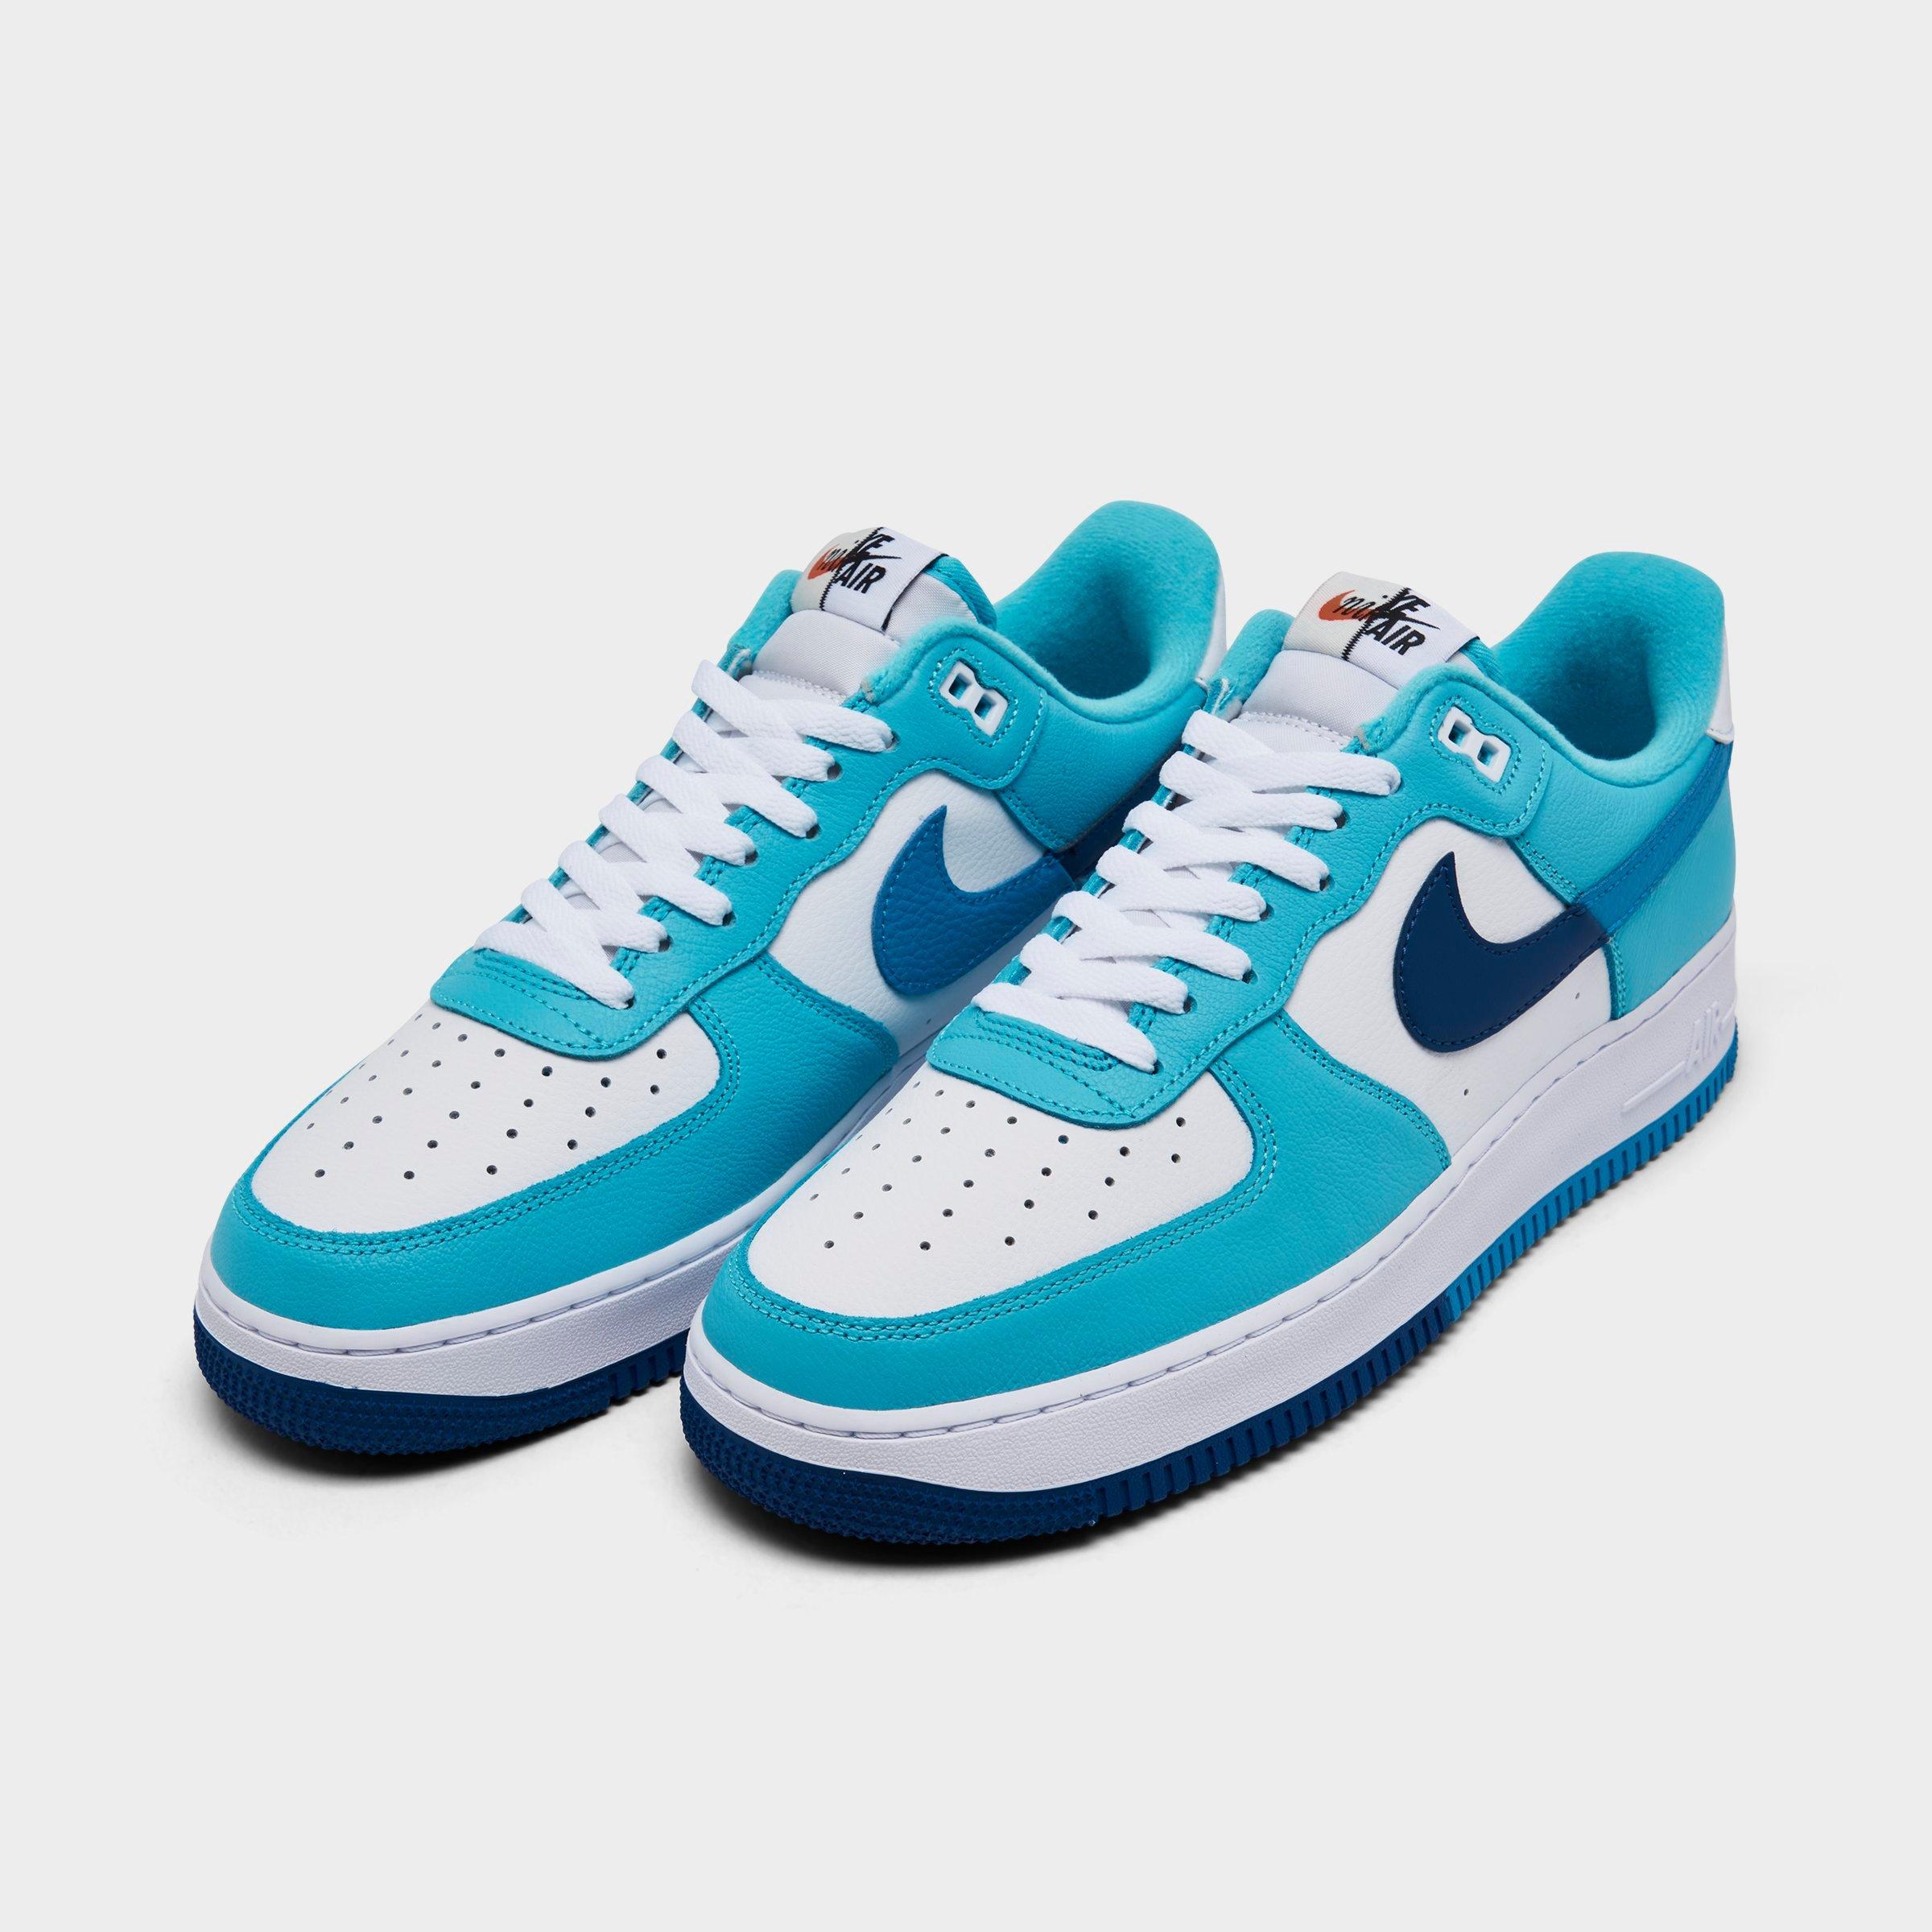 blue air force ones